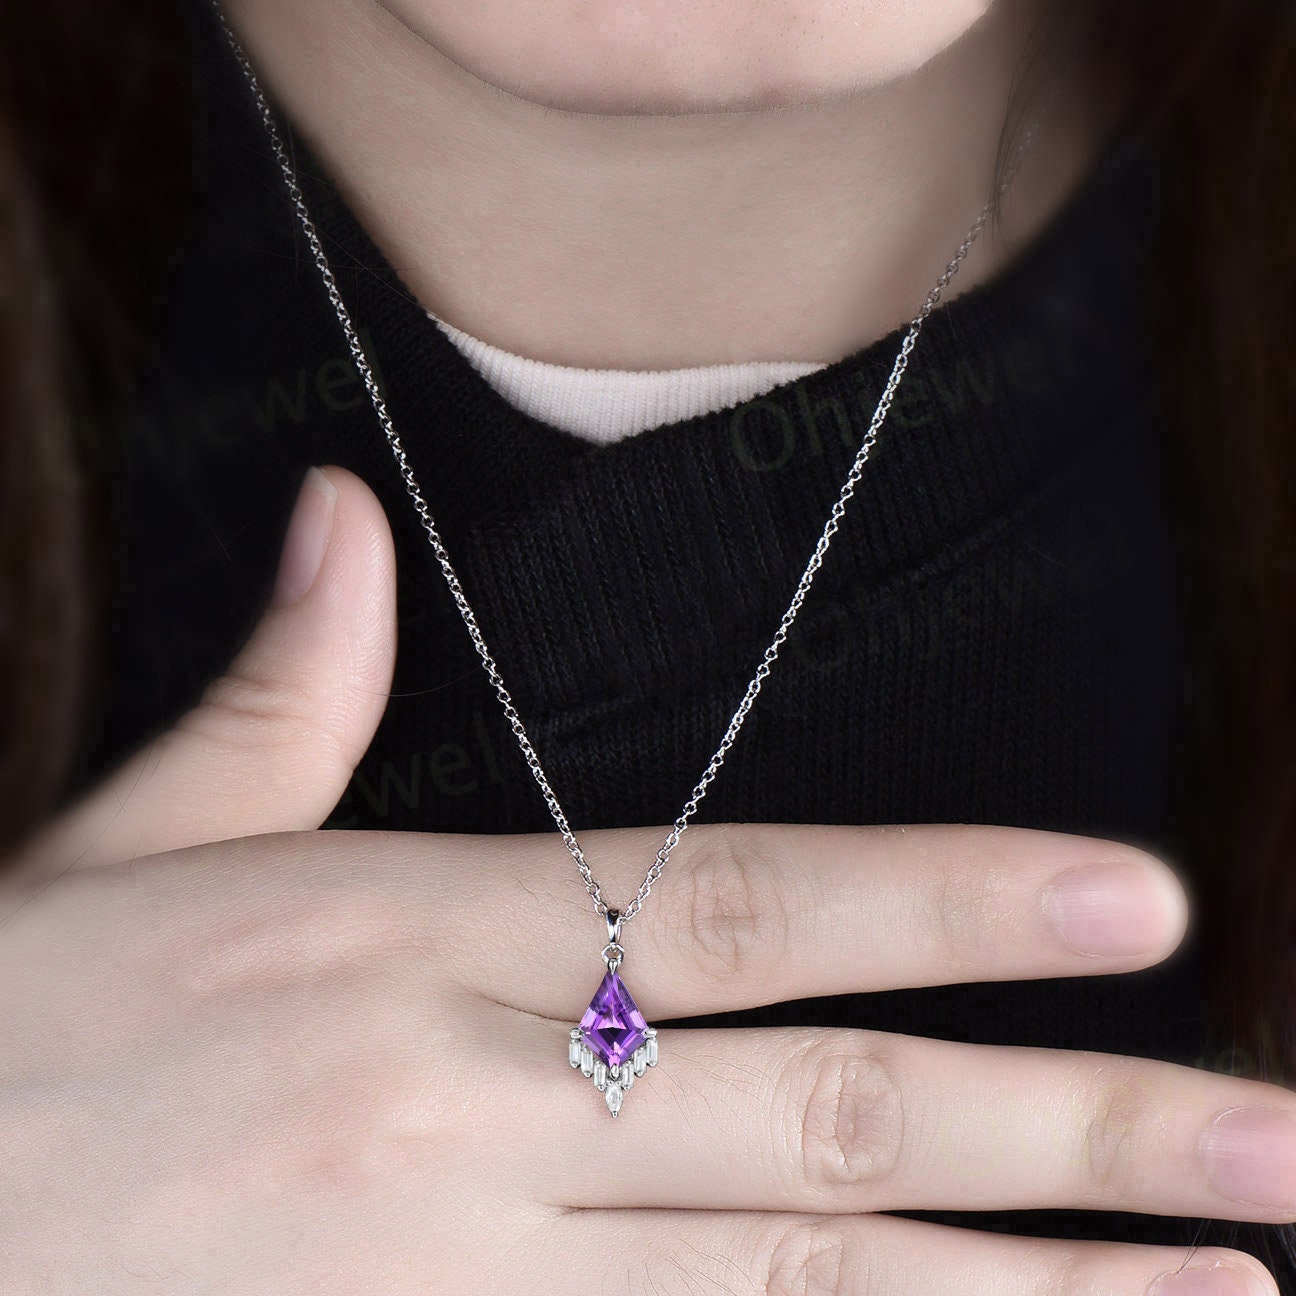 Kite purple amethyst necklace rose gold vintage February birthstone marquise baguette moissanite dainty unique necklace pendant women gift